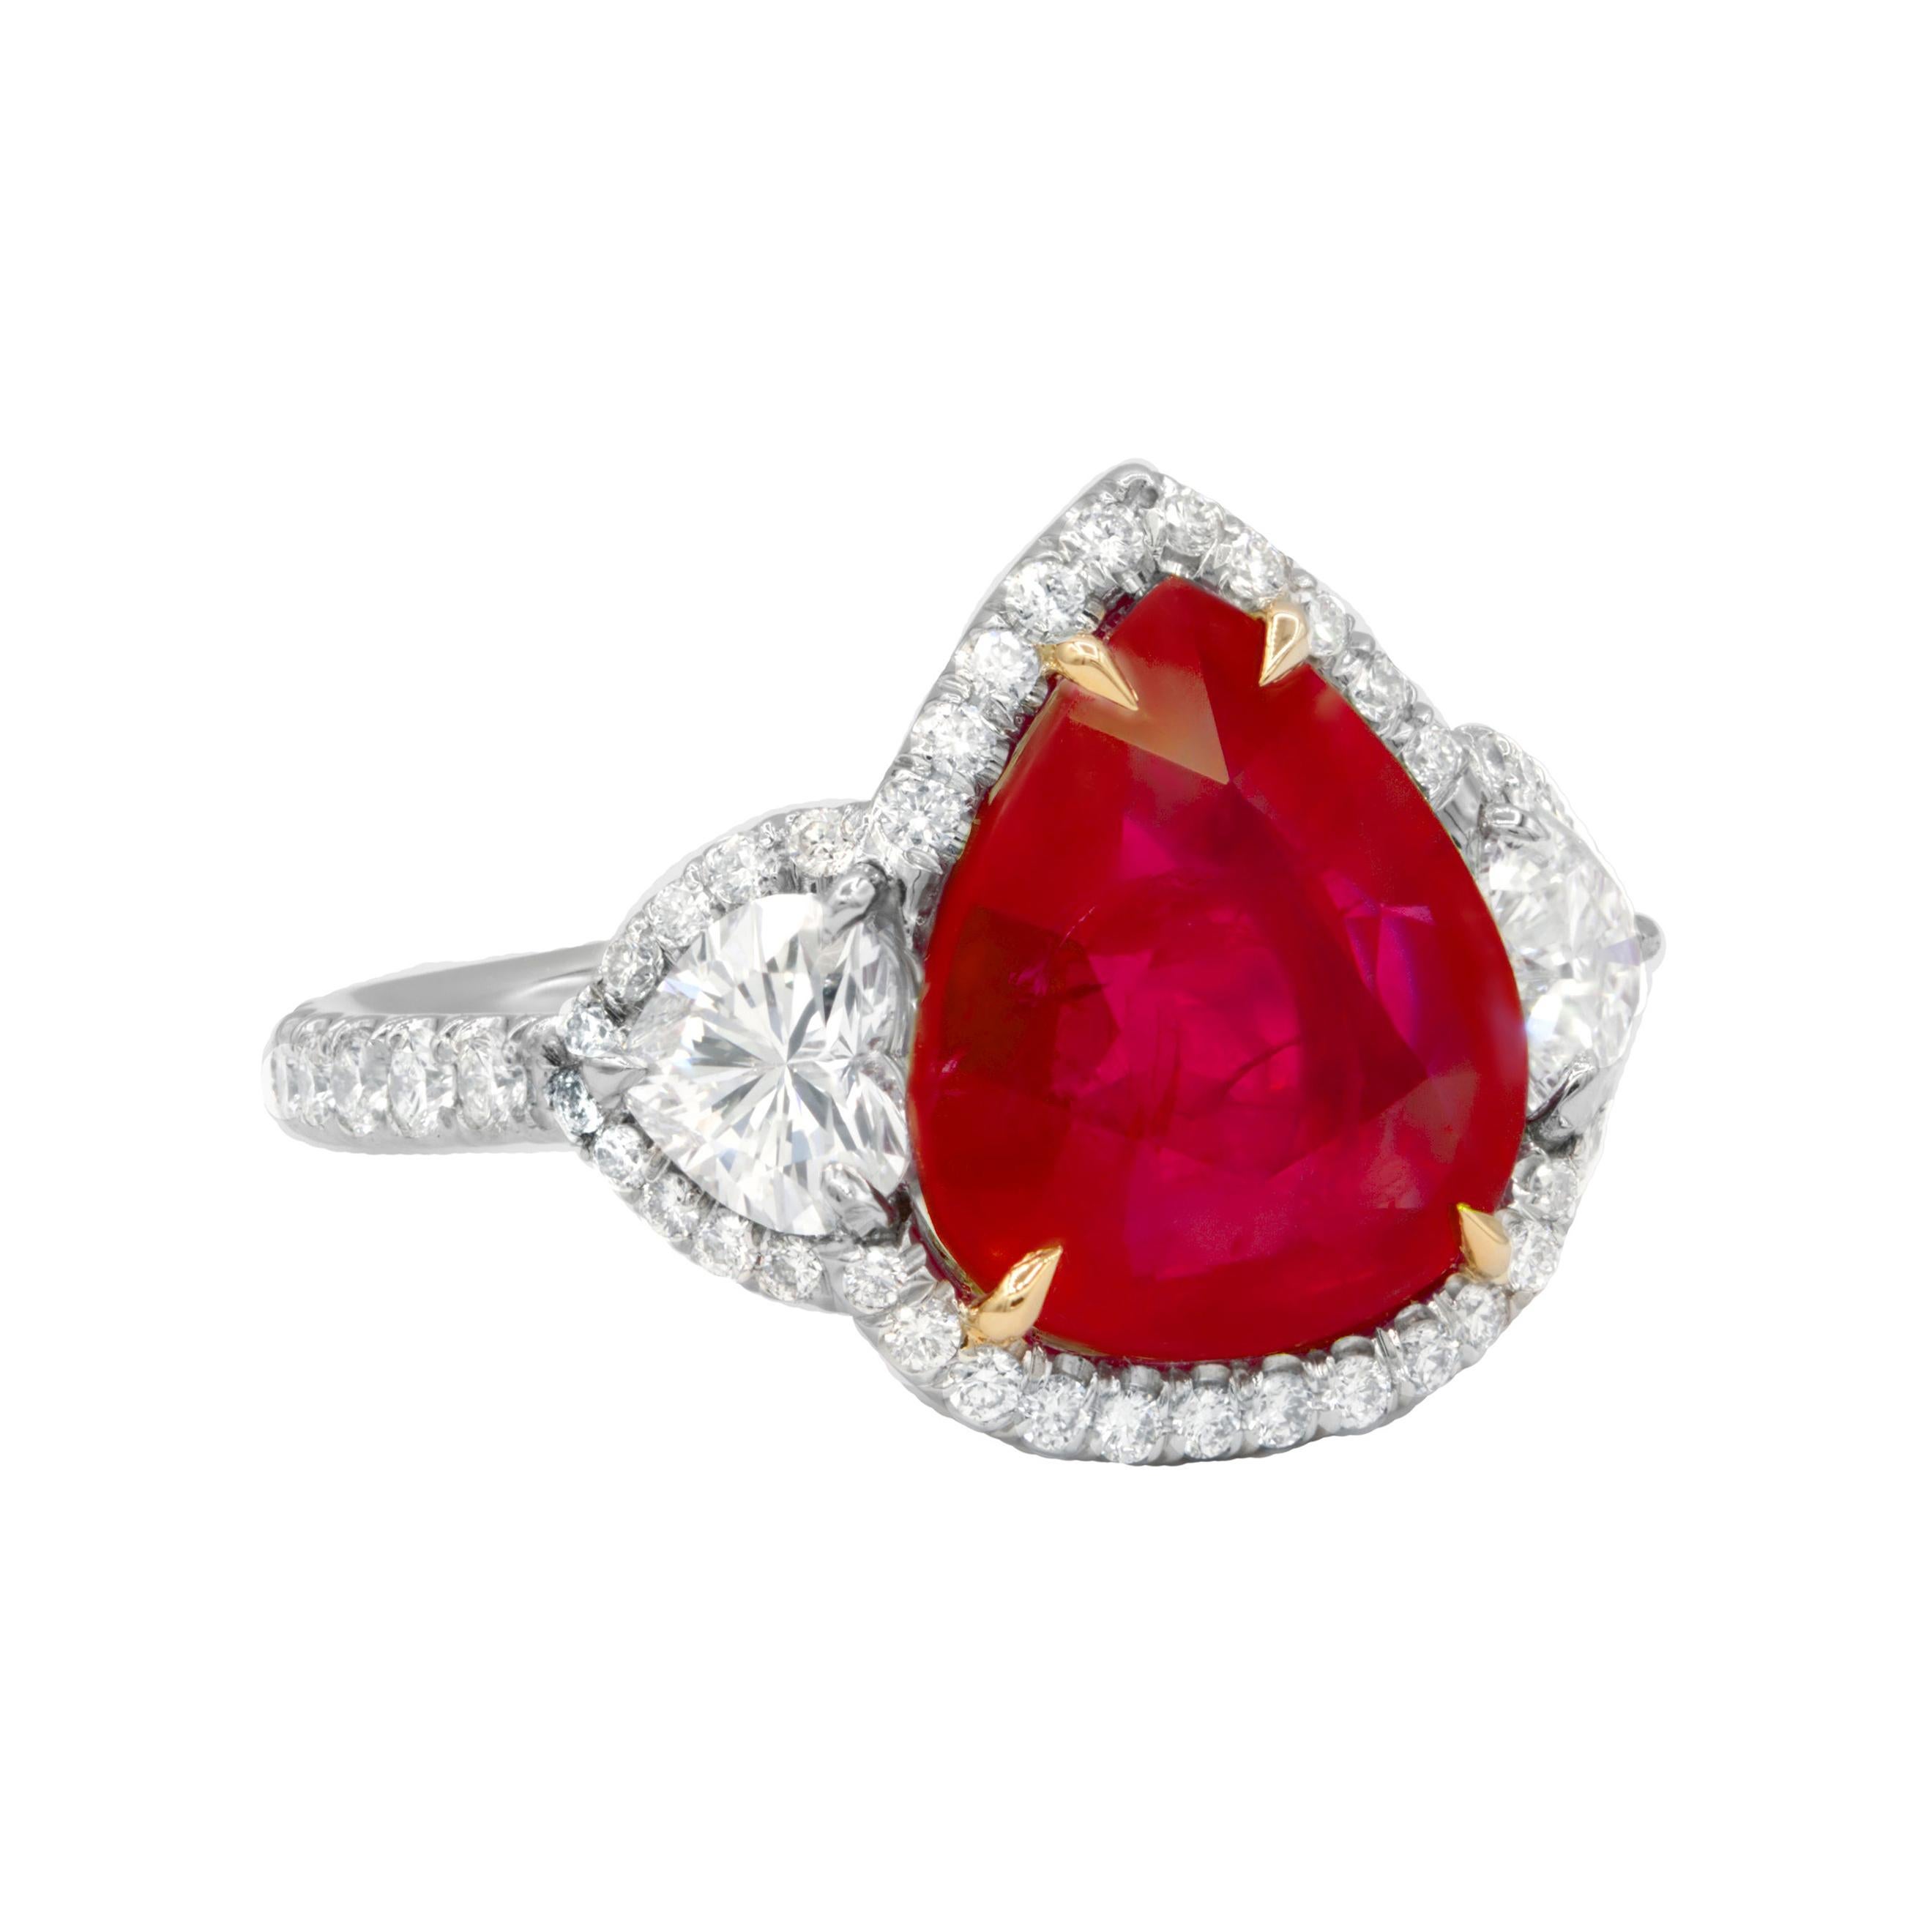 Magnificent ruby diamond ring with gia certified 6.27ct ruby set with 1.70ct of round diamonds all the way around in platinum halo and 2 hearts gia certified on the sides setting
